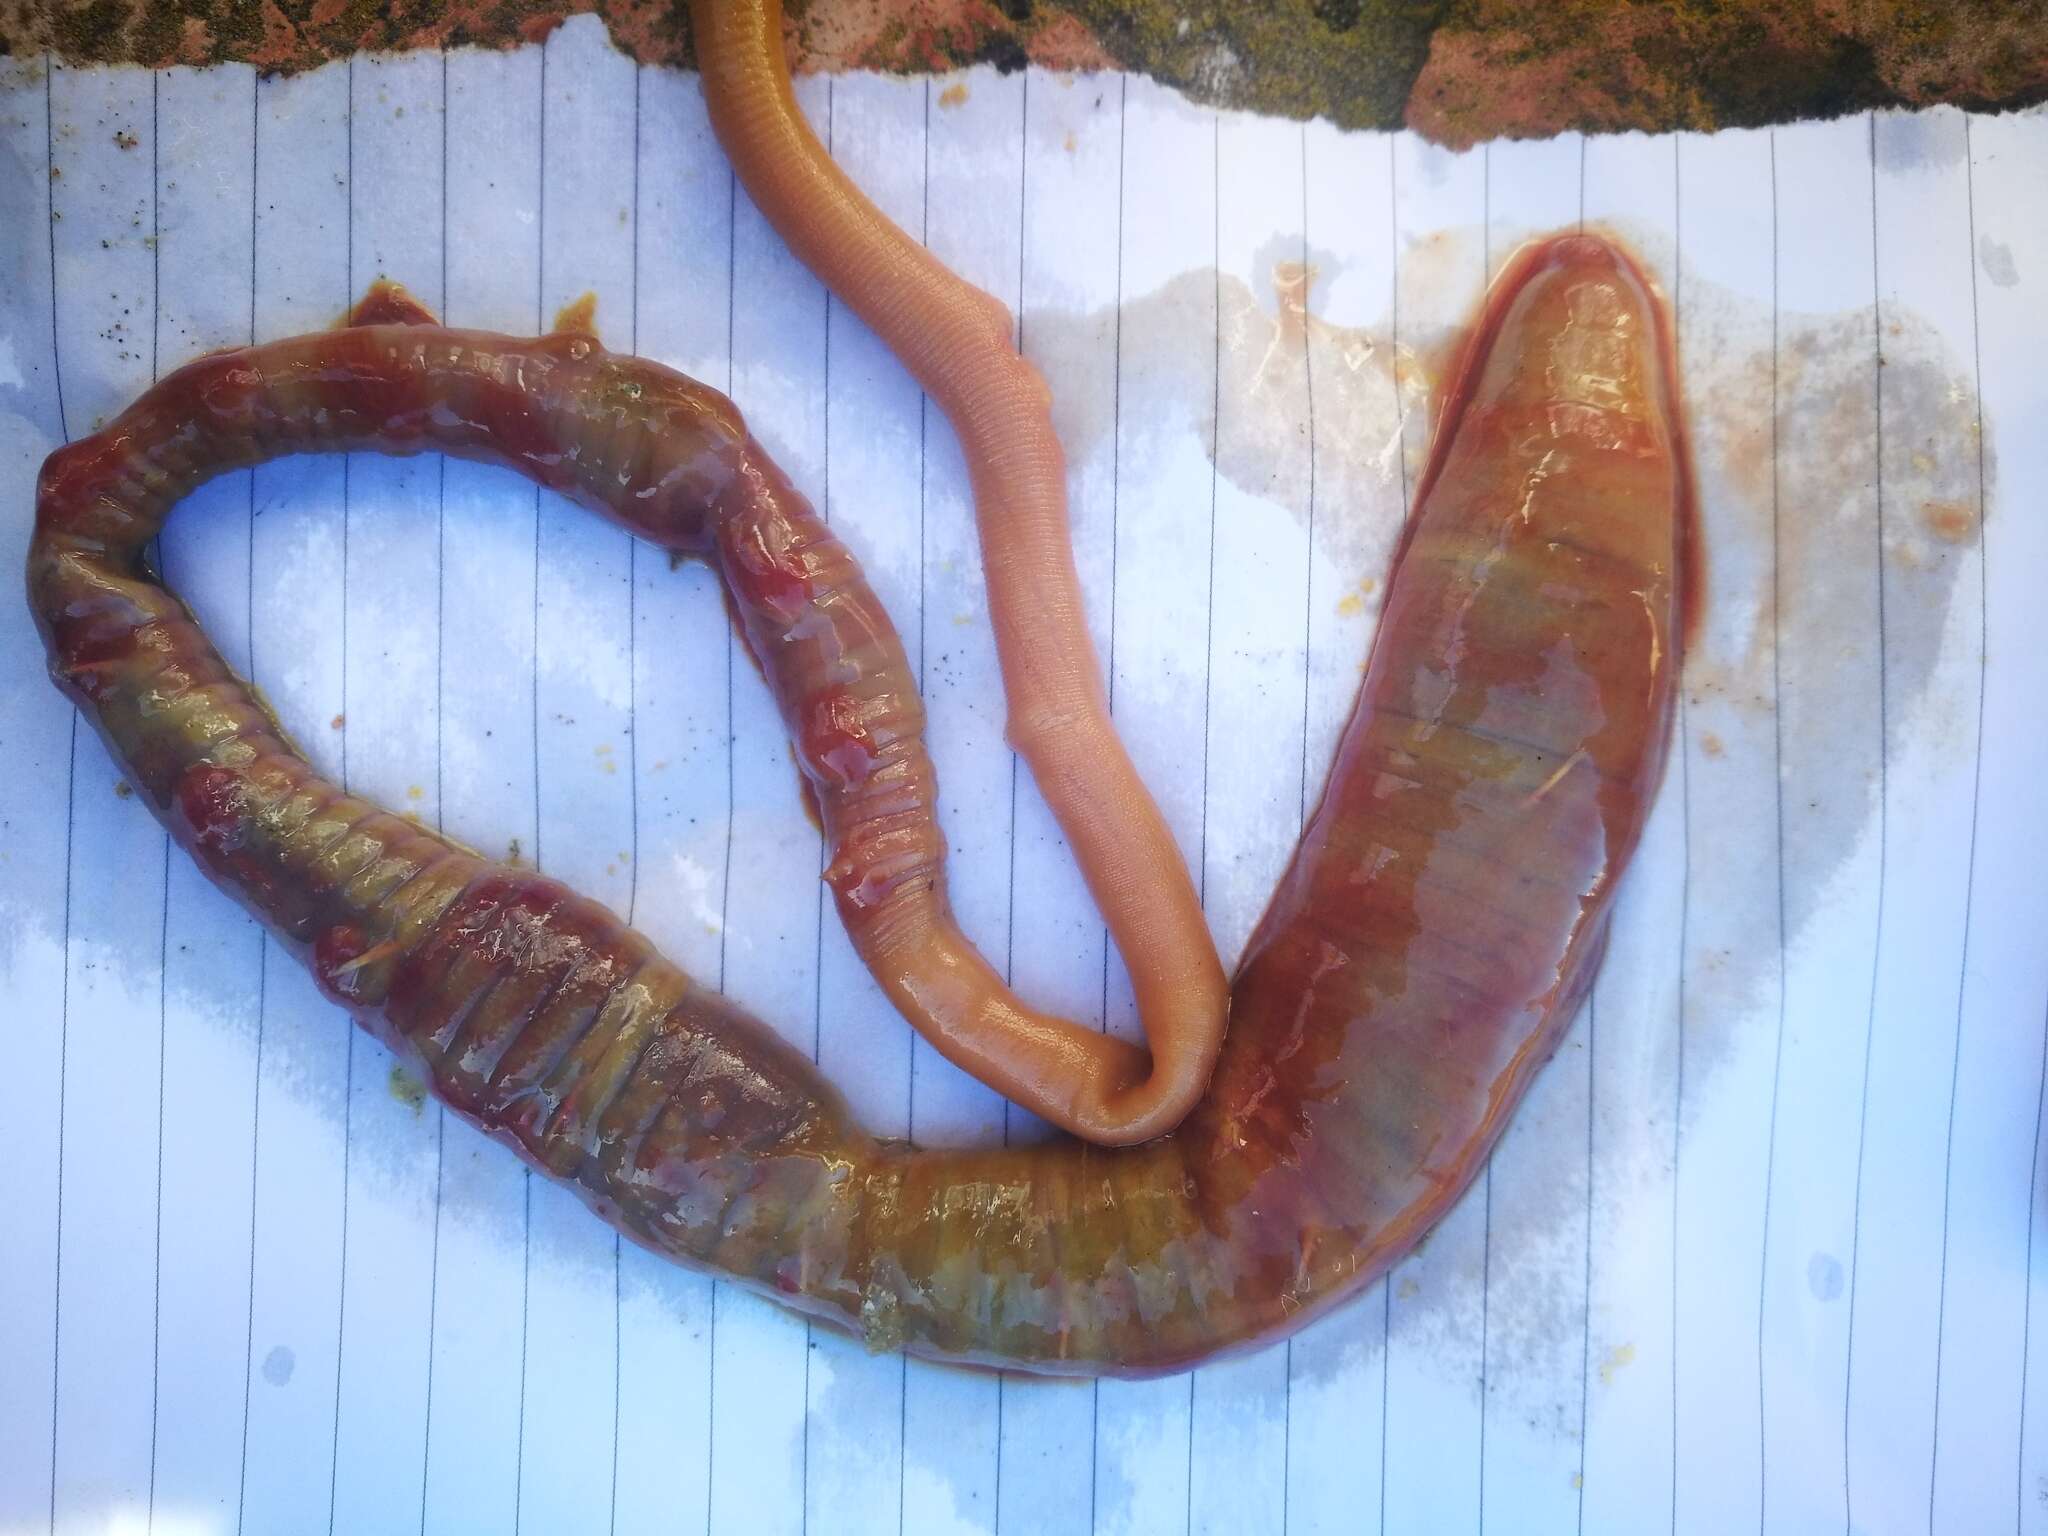 Image of bloodworm (local usage in South Africa for Arenicola loveni, although lugworm is the worldwide English vernacular for genus Arenicola)